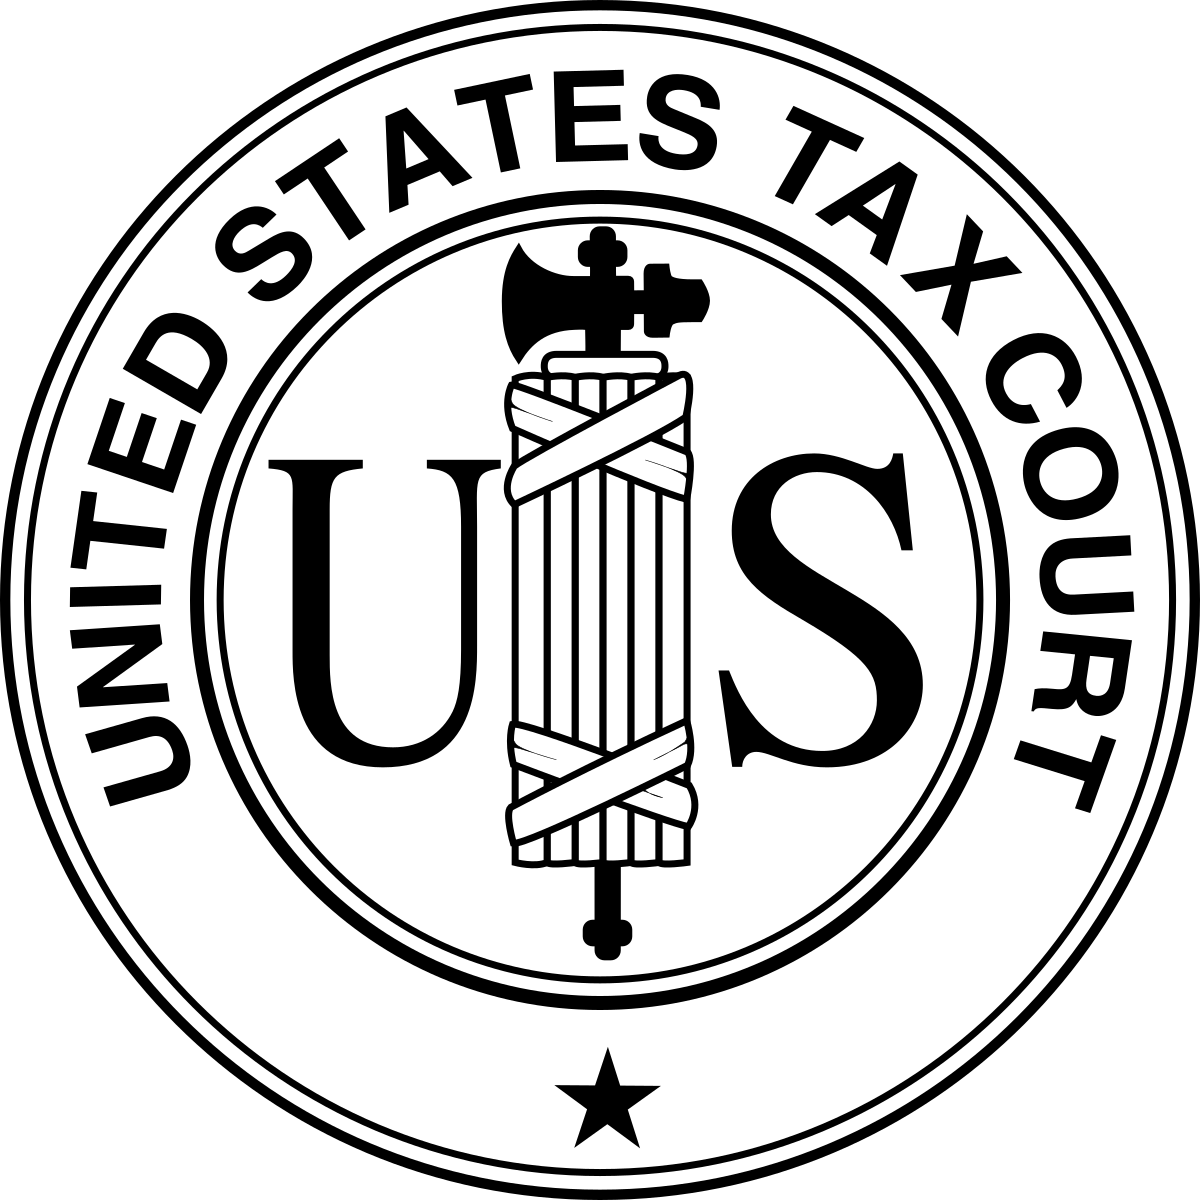 Evidence clipart impartial jury. United states tax court